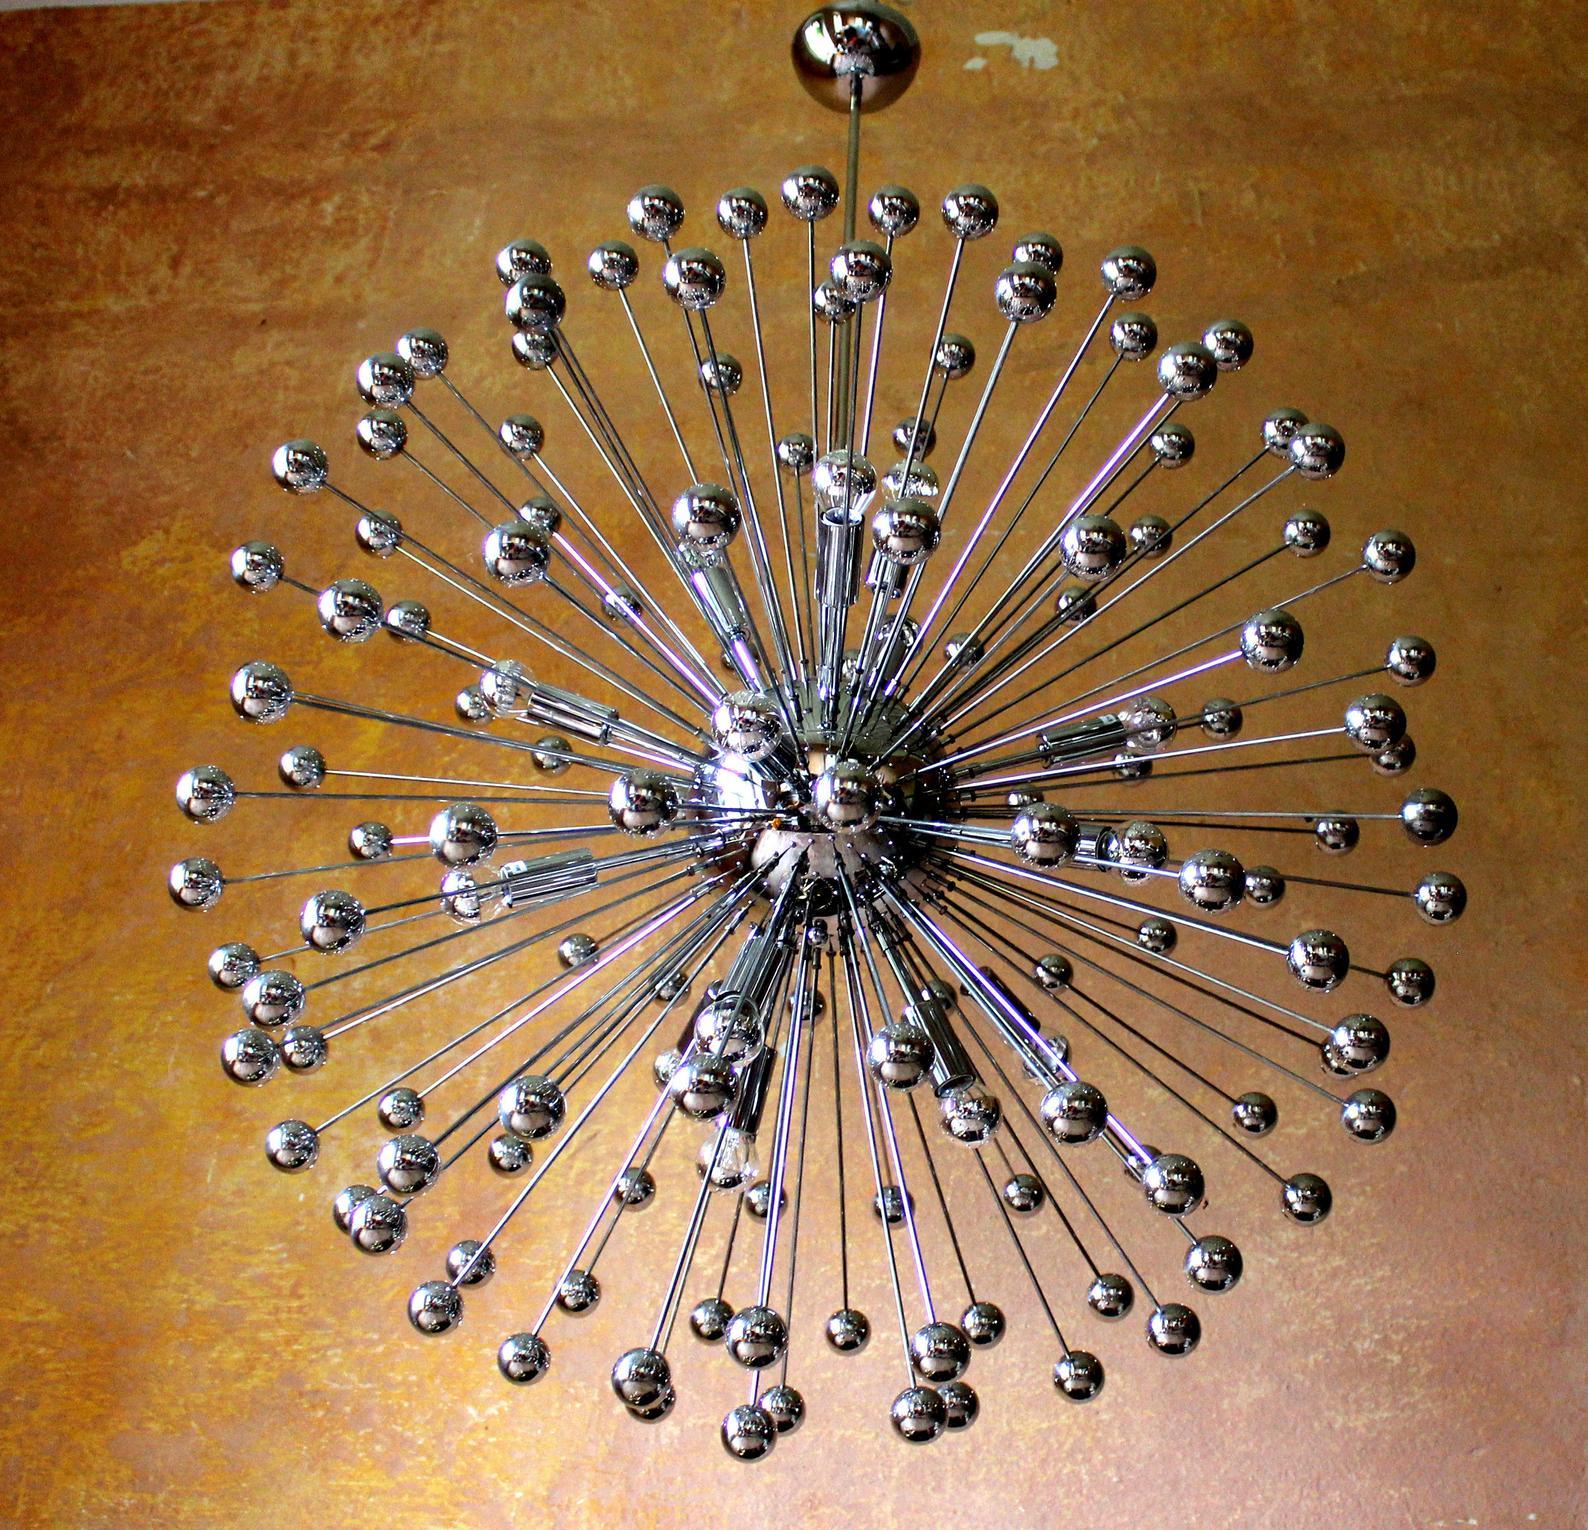 15 lights concert hall chandelier 1970s with chromed and mirrored elements

Measures: Diameter 3.2 feet/ 95cm original total height 4.6 feet/ 136cm

1 of 2 large 15 lights (E14) sputnik chandelier atomic design, 1960s-1970s
The piece is